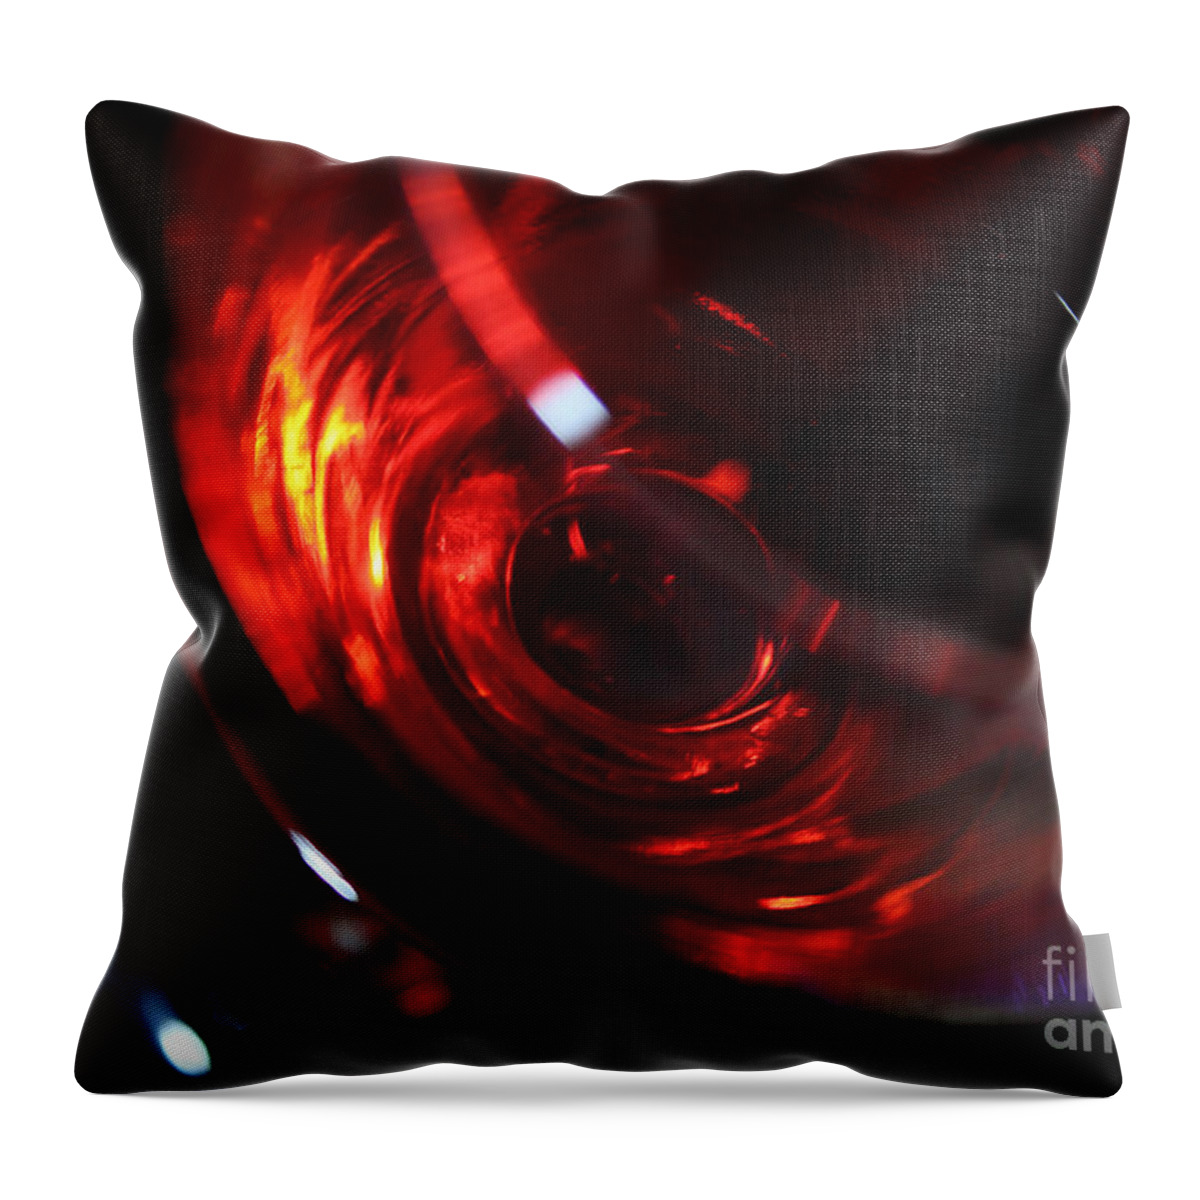 Wine Throw Pillow featuring the photograph Seduction by Krissy Katsimbras